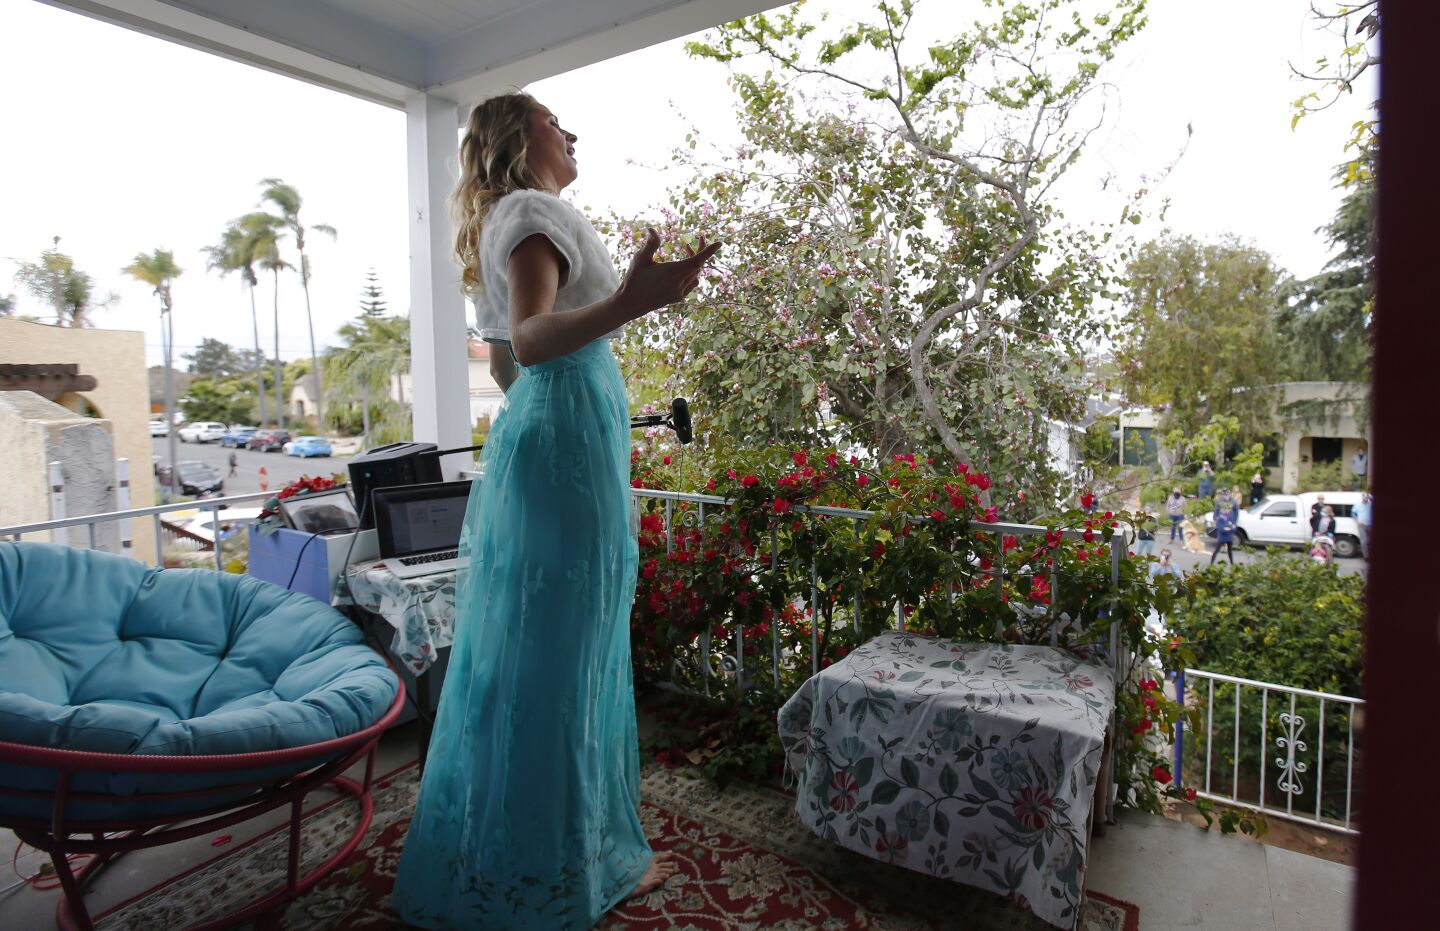 Opera singer Victoria Robertson, a soprano, sings from the porch of her North Park home on April 19, 2020. For the second week in a row, Robertson performed for 15 minutes to a crowd, who kept their distance from each other on the street below.